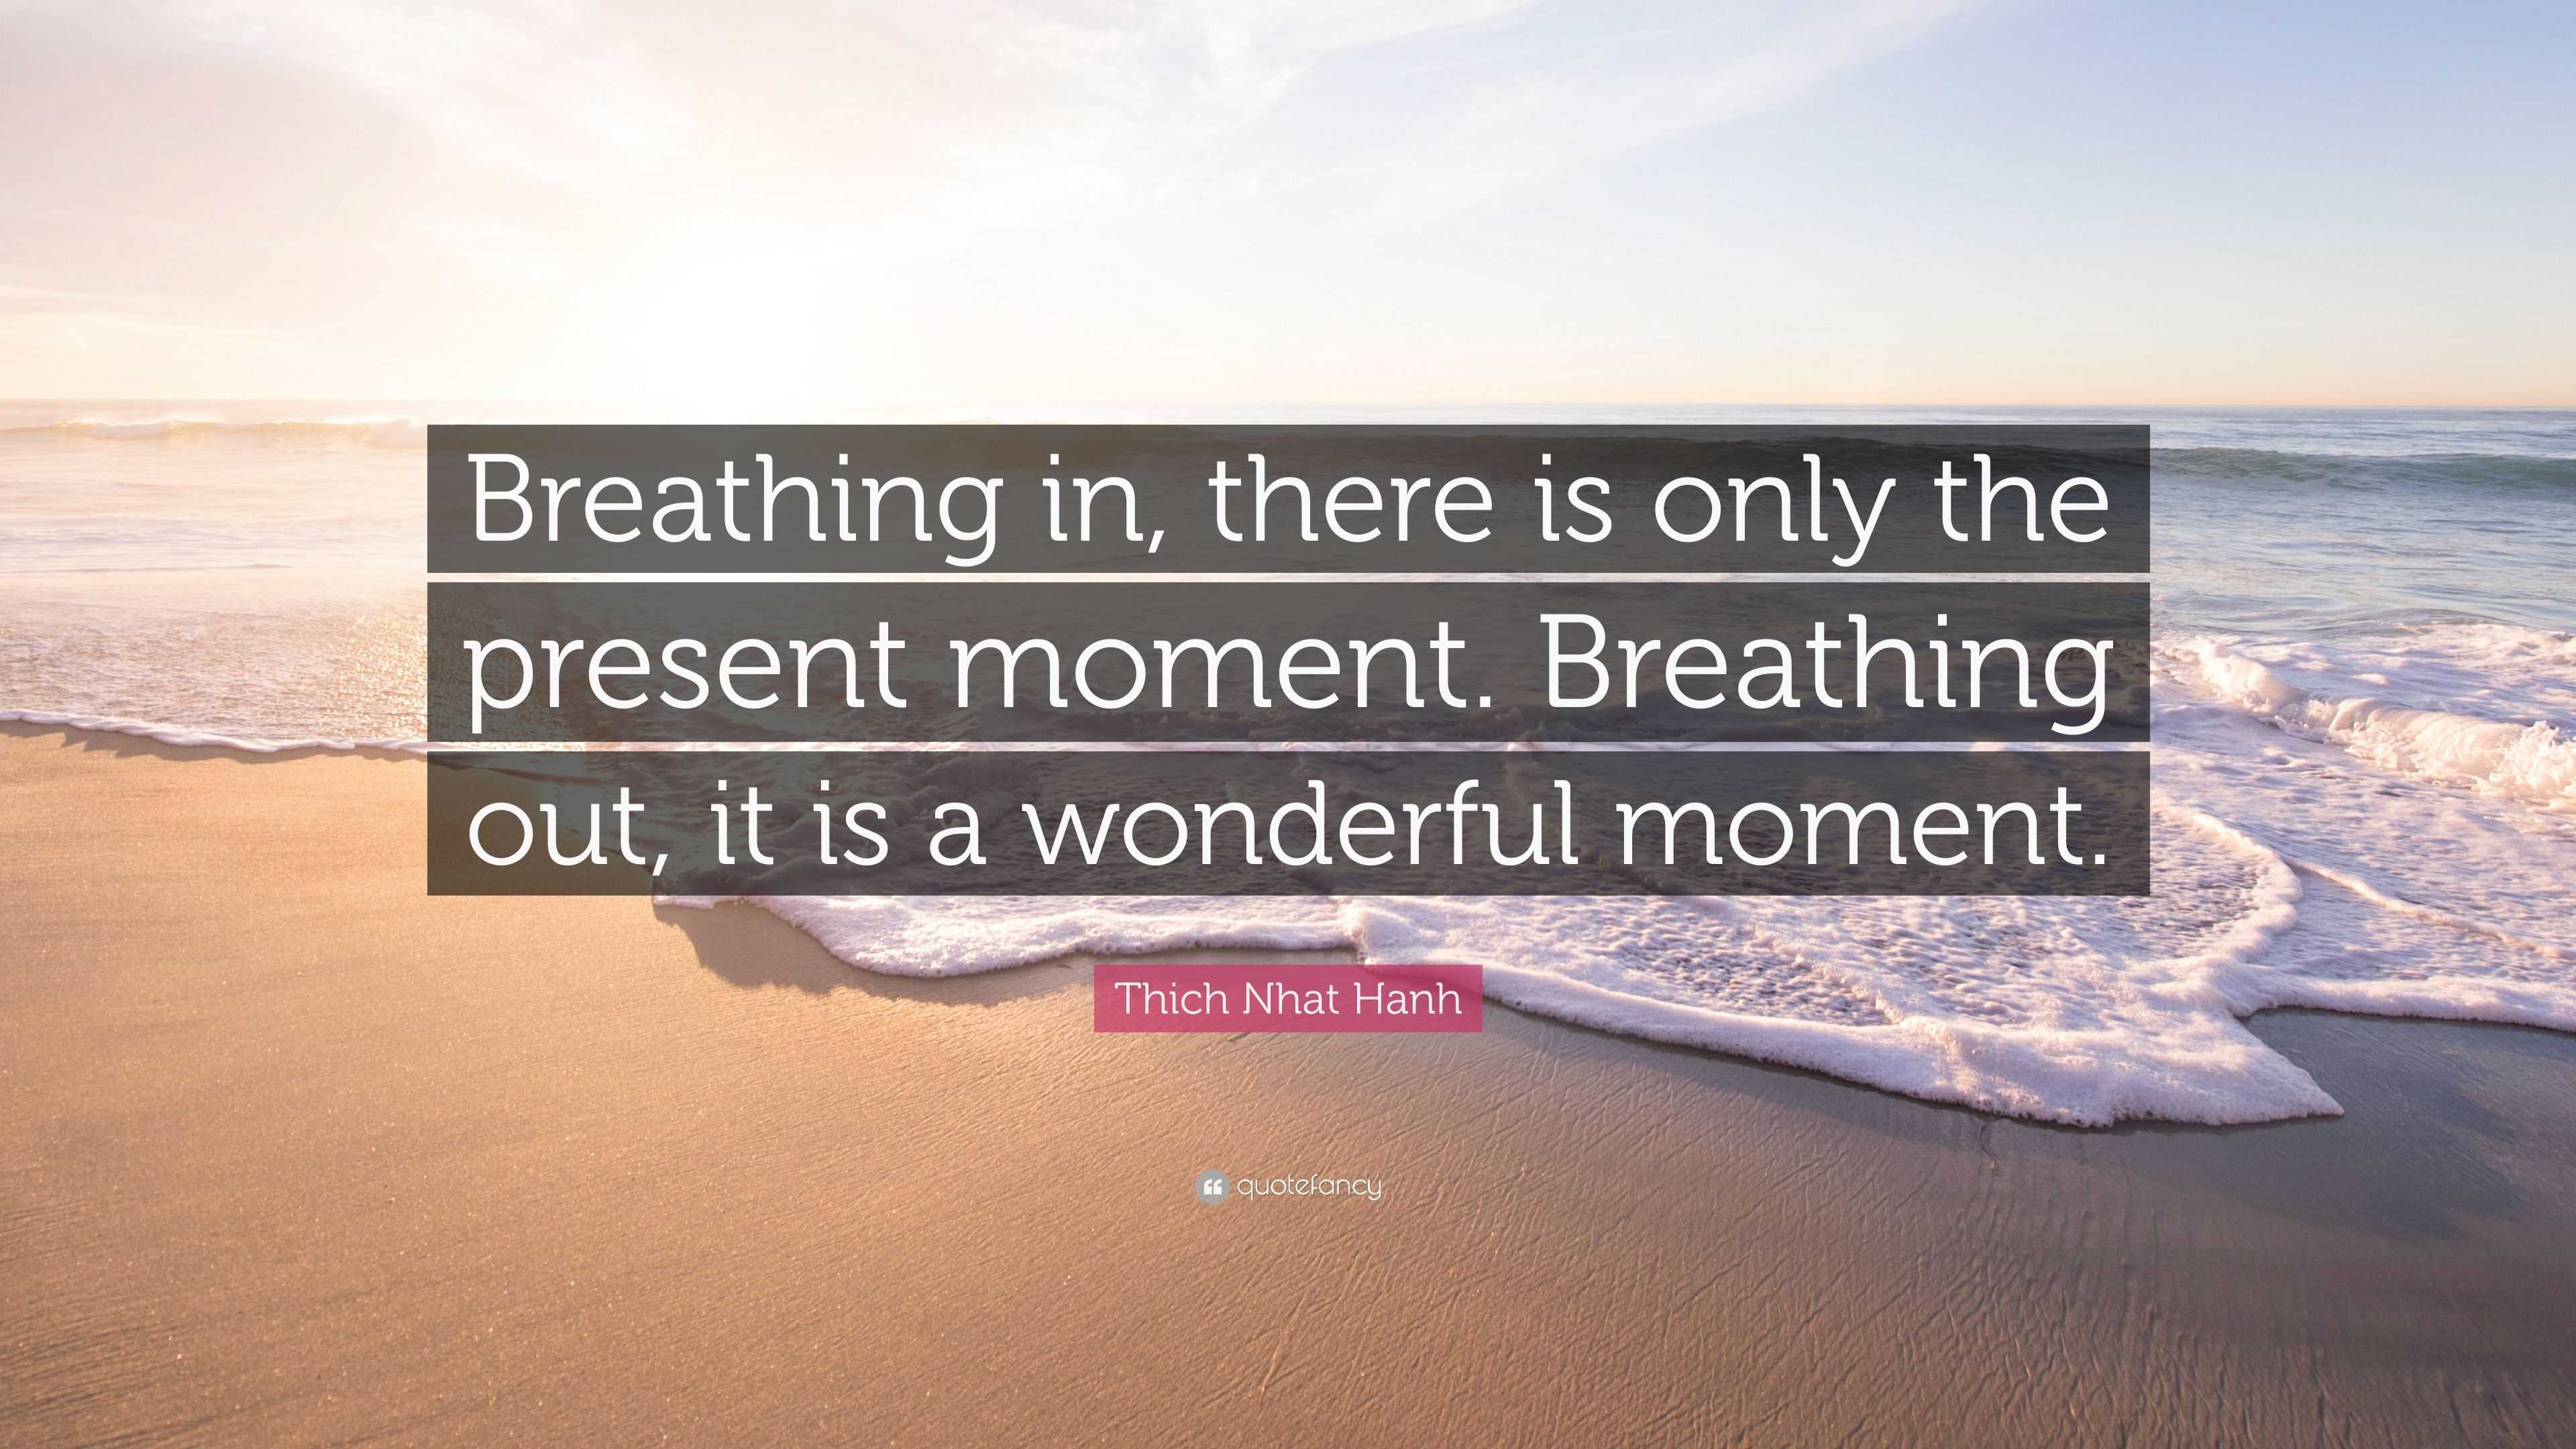 4739985 Thich Nhat Hanh Quote Breathing in there is only the present